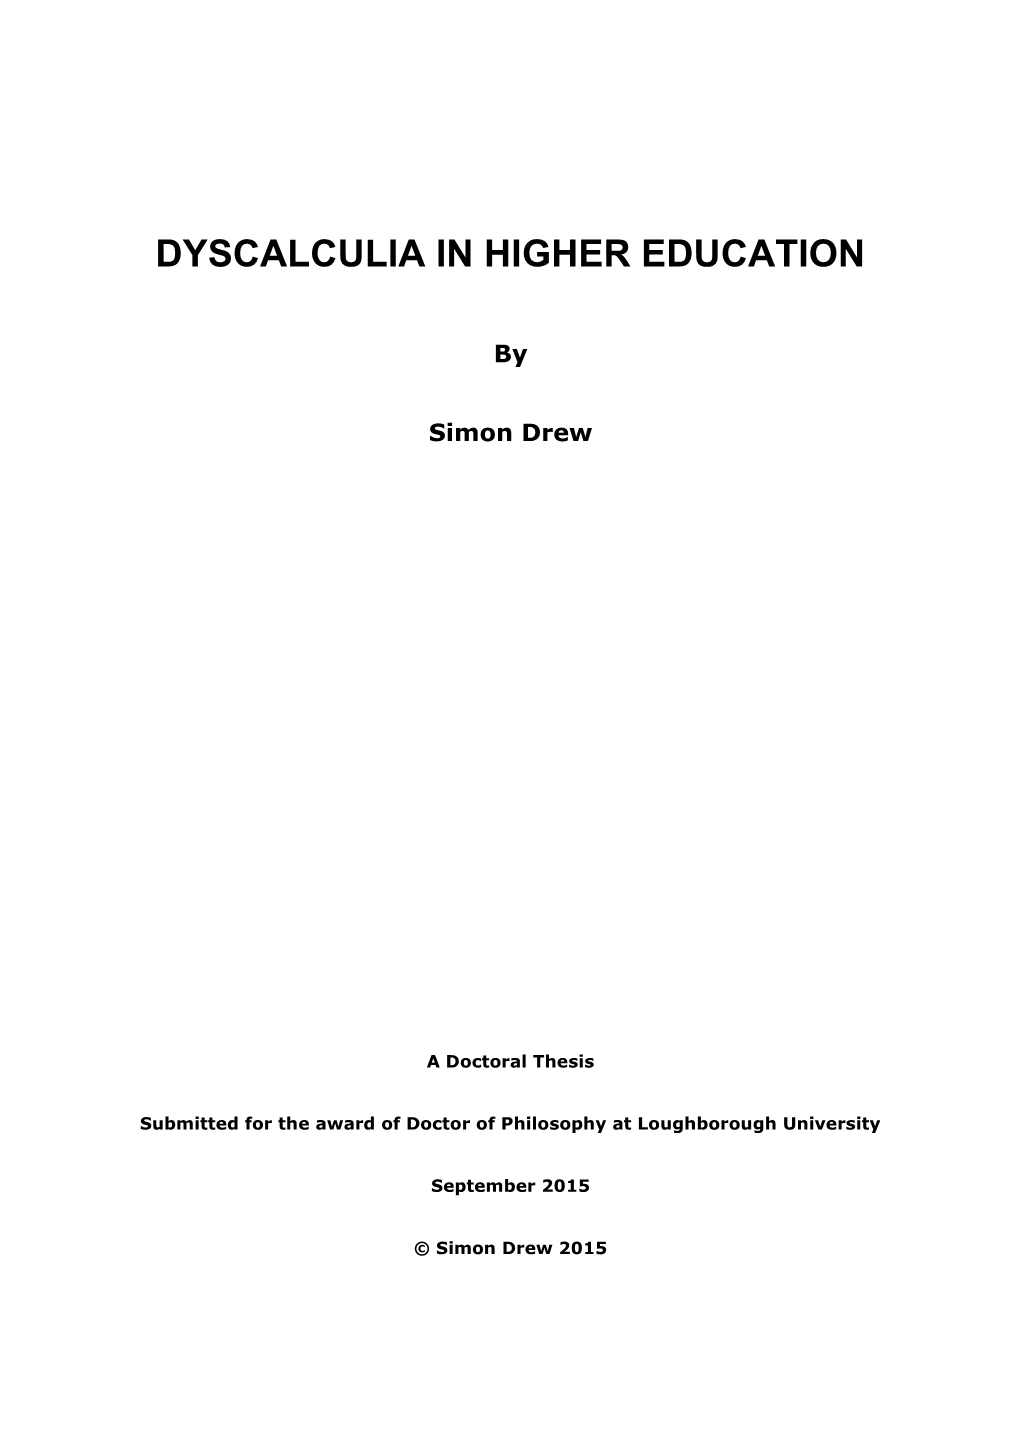 Dyscalculia in Higher Education